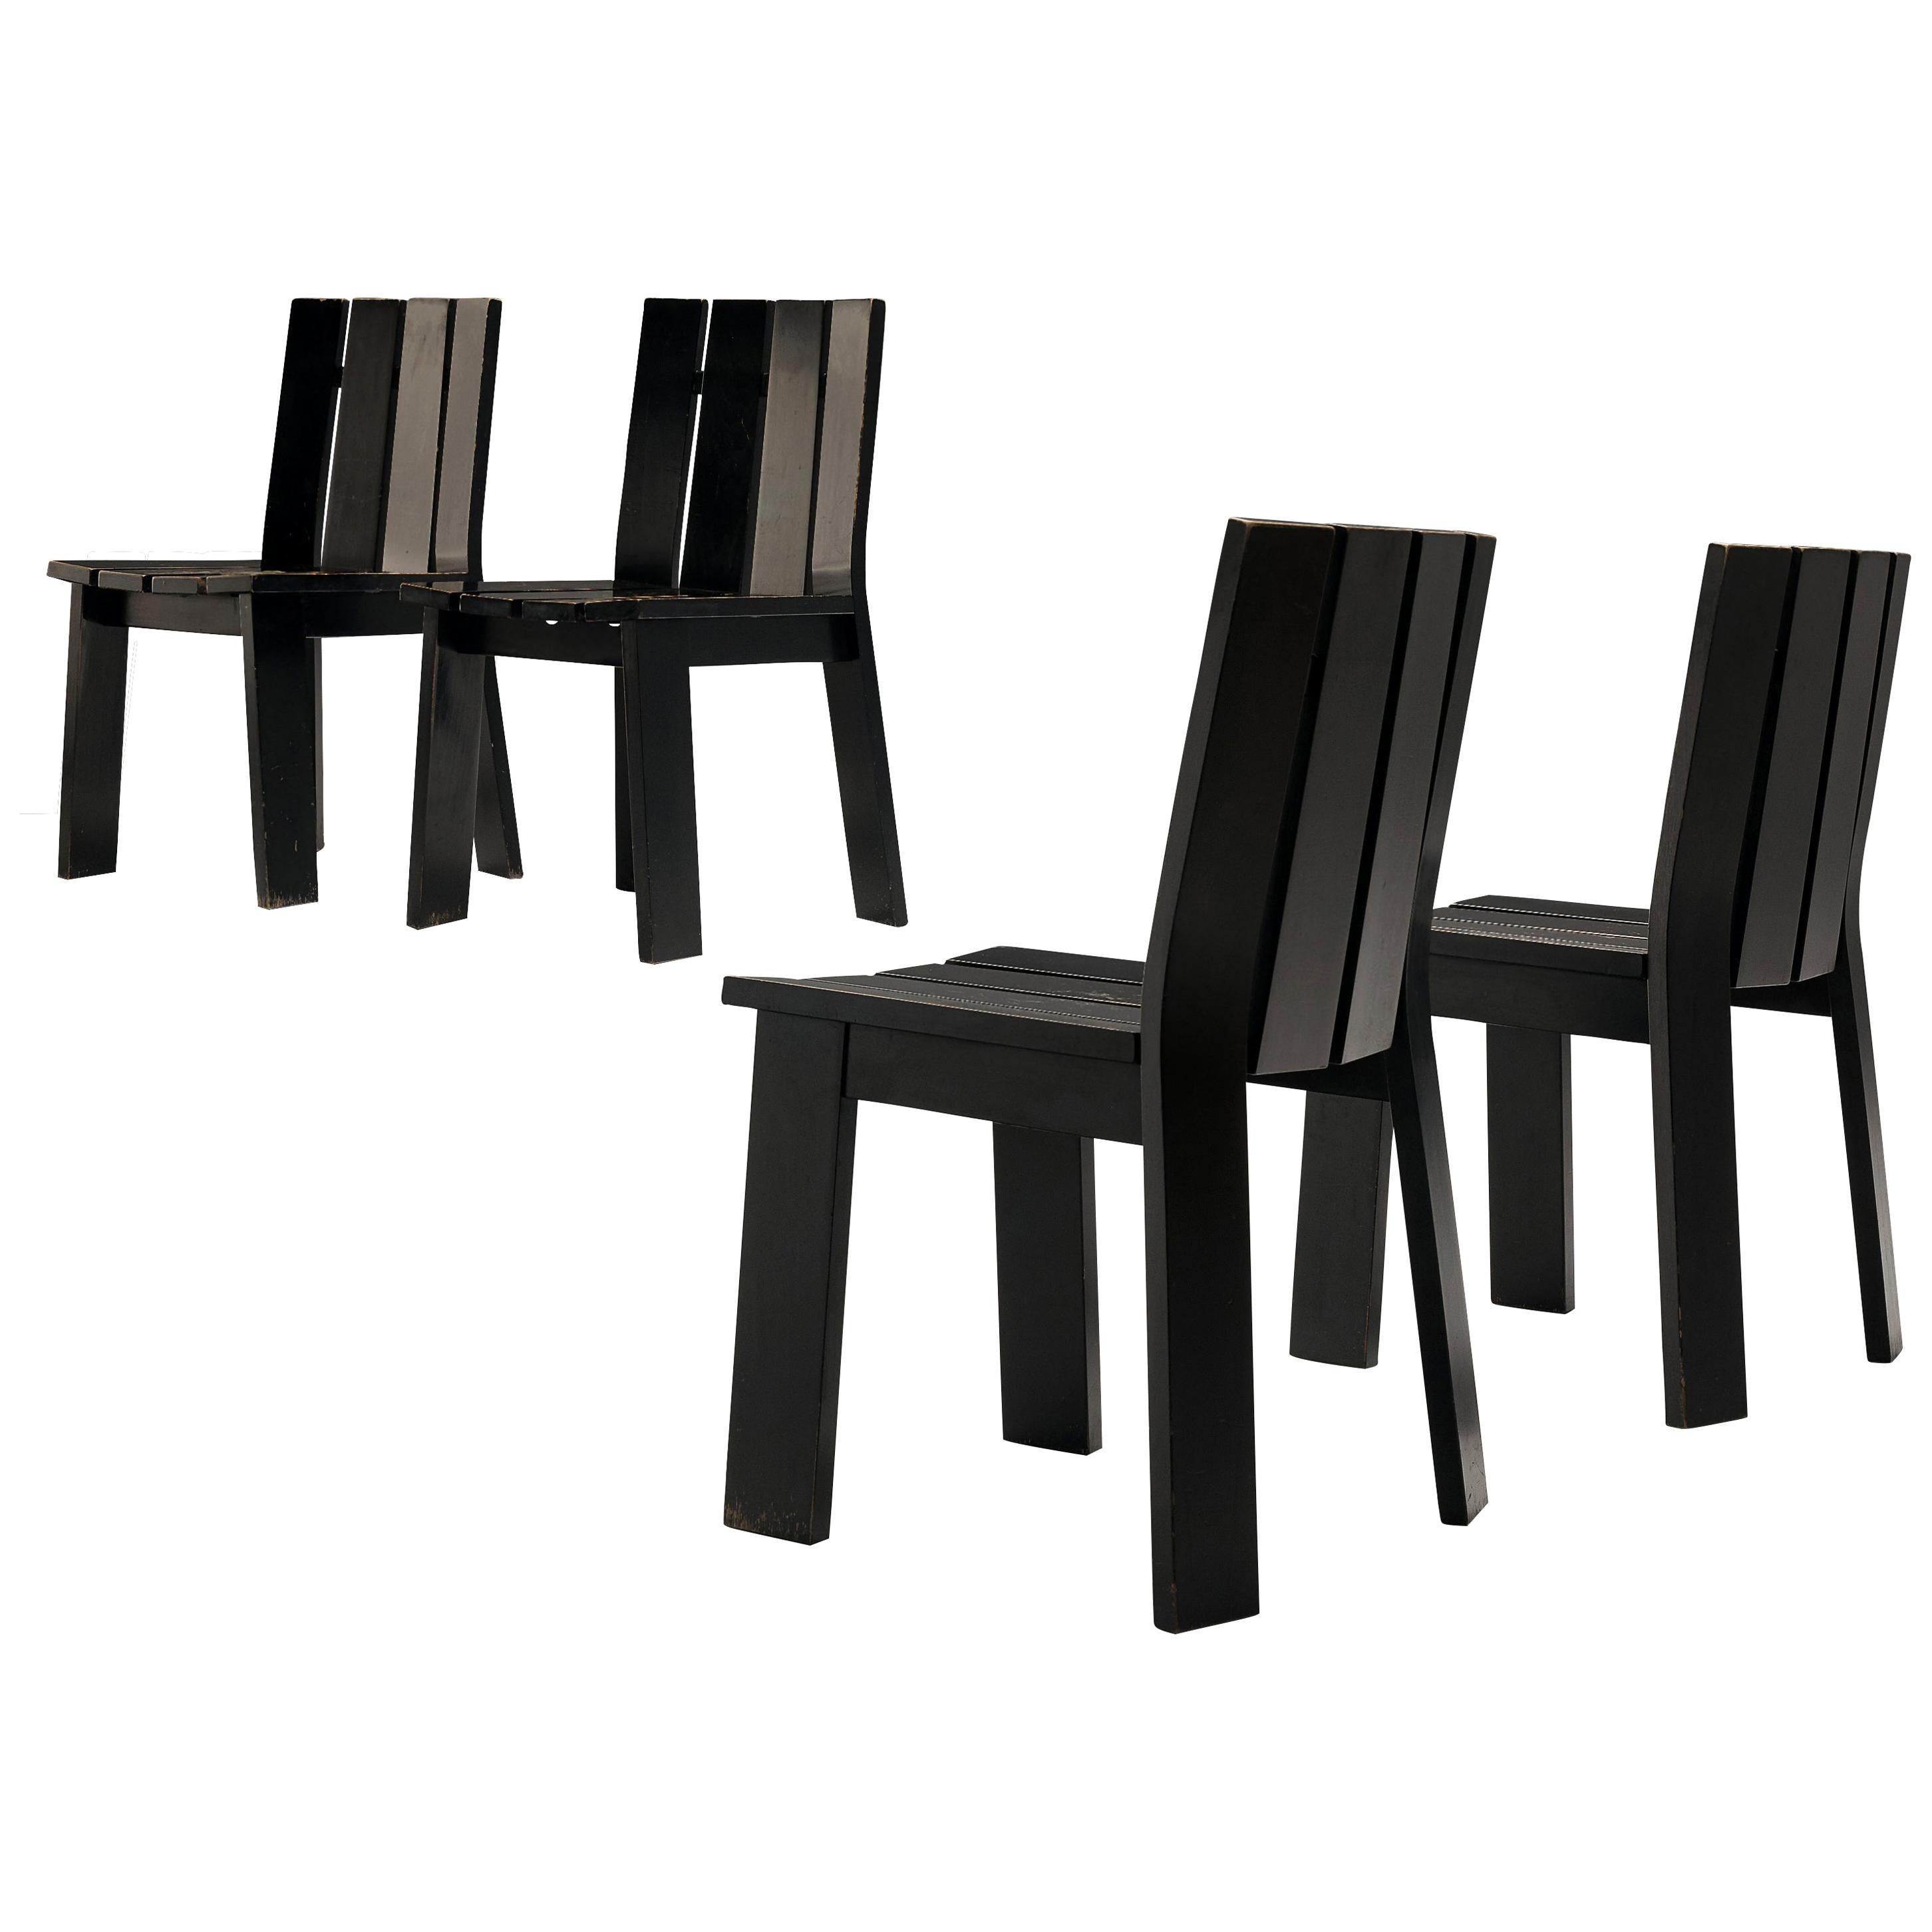 Set of Four Dutch Dining Chairs in Black Colored Wood